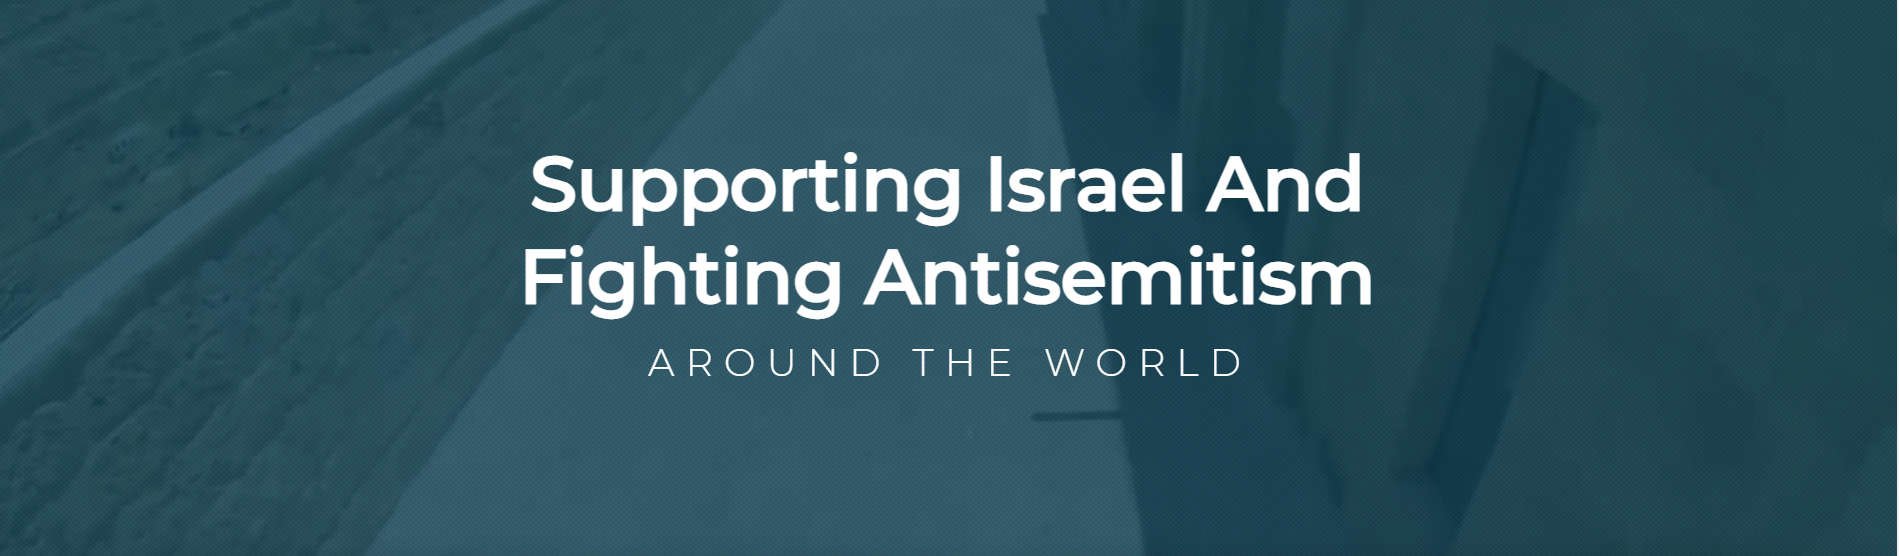 Supporting Israel and Fighting Antisemitism Around the World